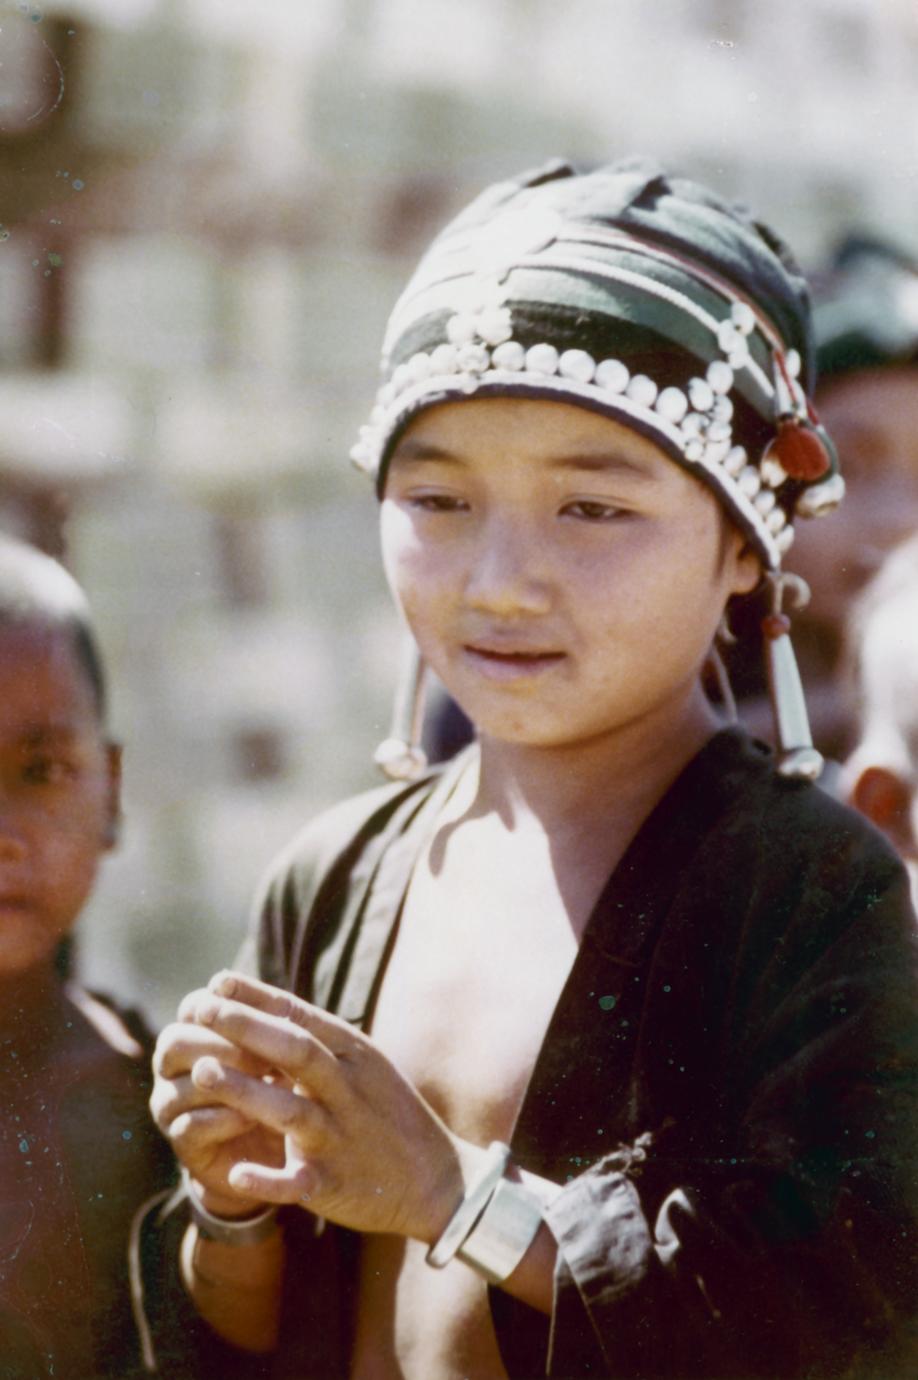 Akha girl in the village of Phate in Houa Khong Province